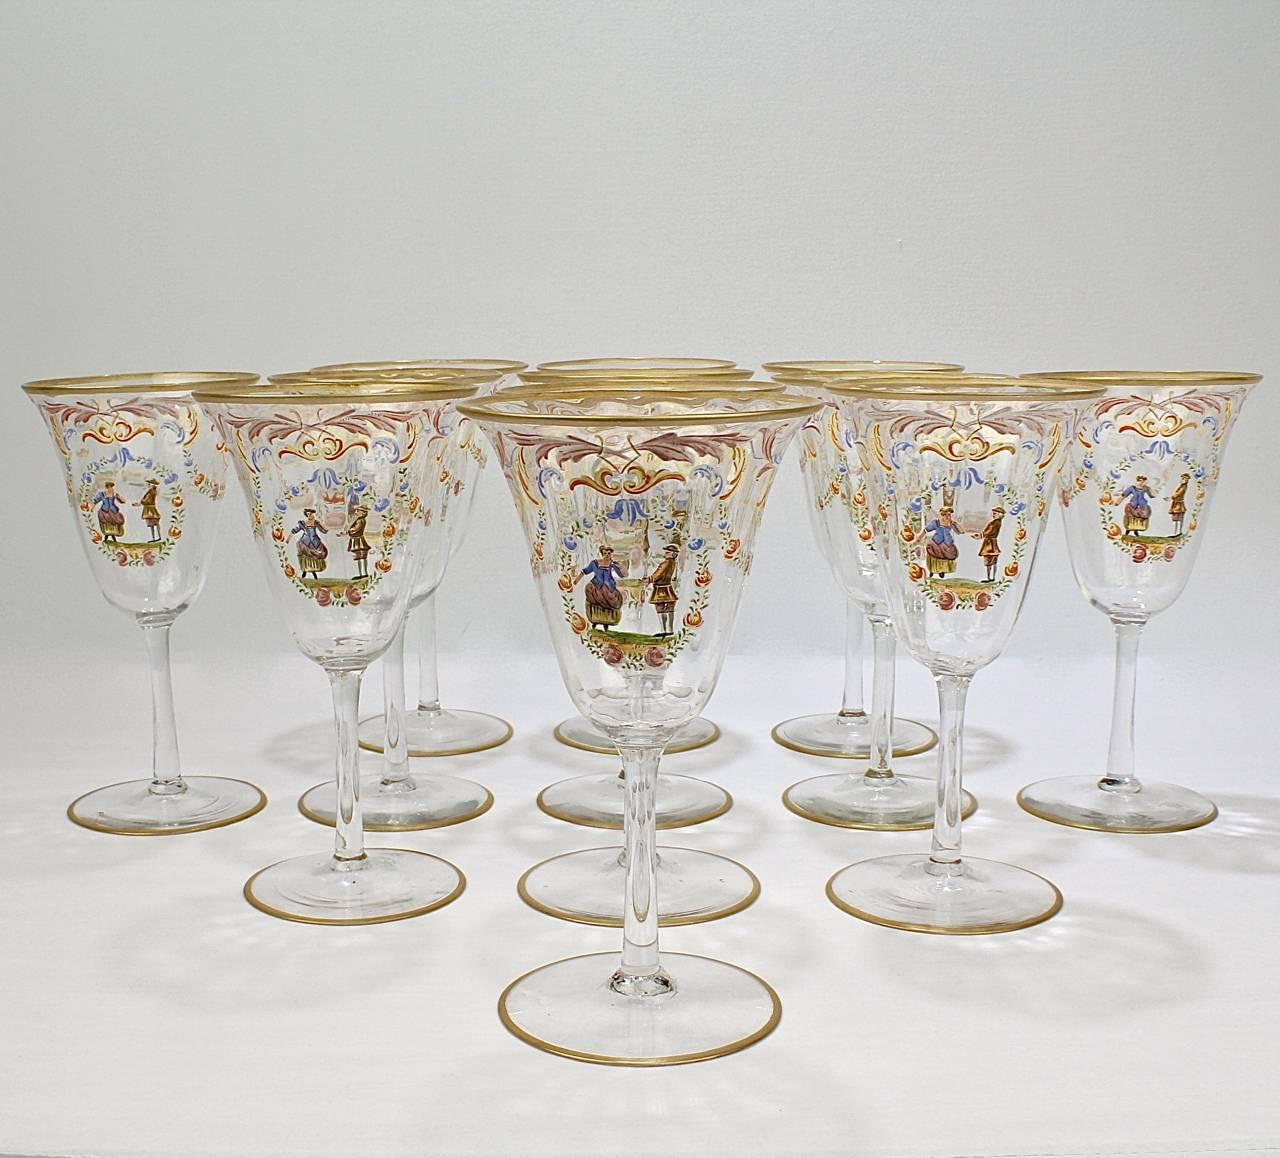 A full set of 12 enameled Italian or Venetian glass water goblets or wine glasses. 

With polychrome Florentine enamel decoration, a central cartouche bearing a peasant couple surrounded by a wreath with rose, and gilded feet and